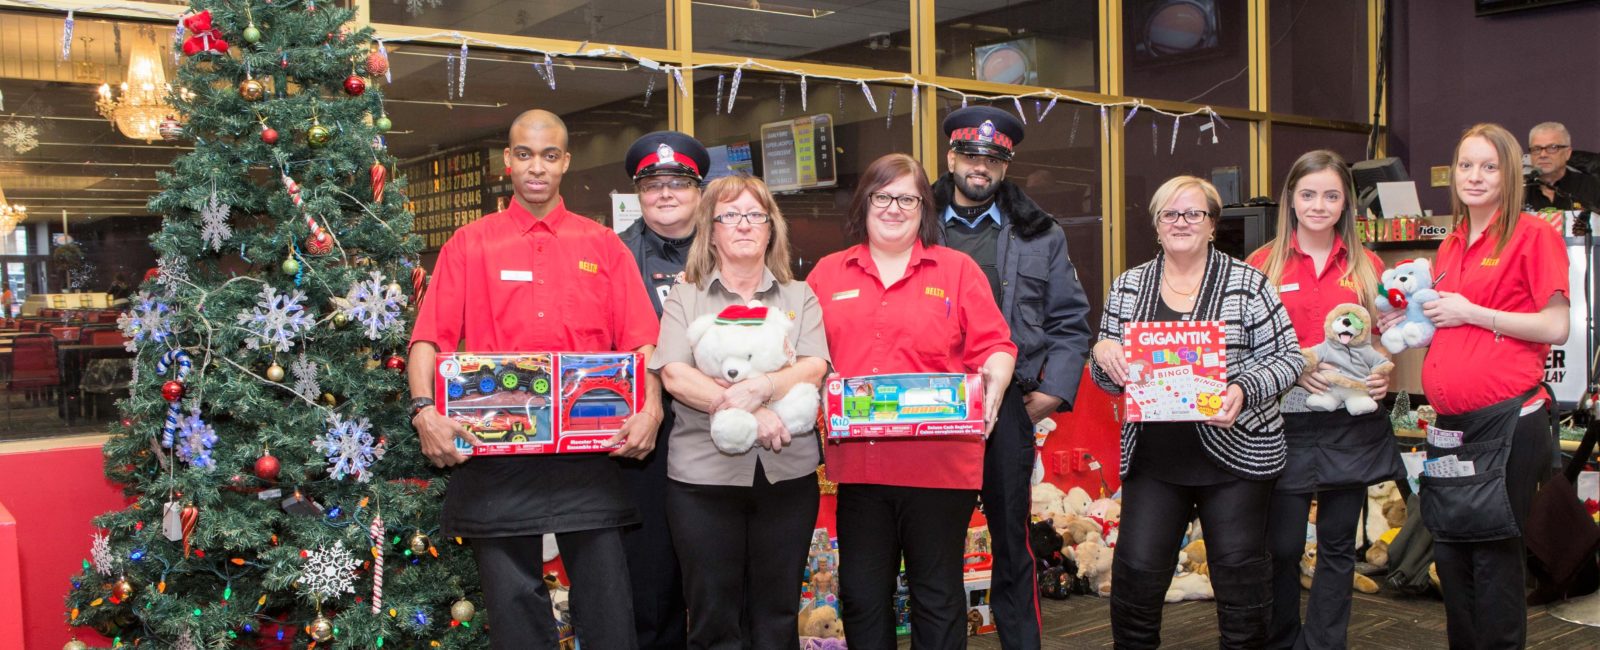 DELTA DOWNSVIEW DONATES $600 WORTH OF TOYS FOR THE COMMUNITY